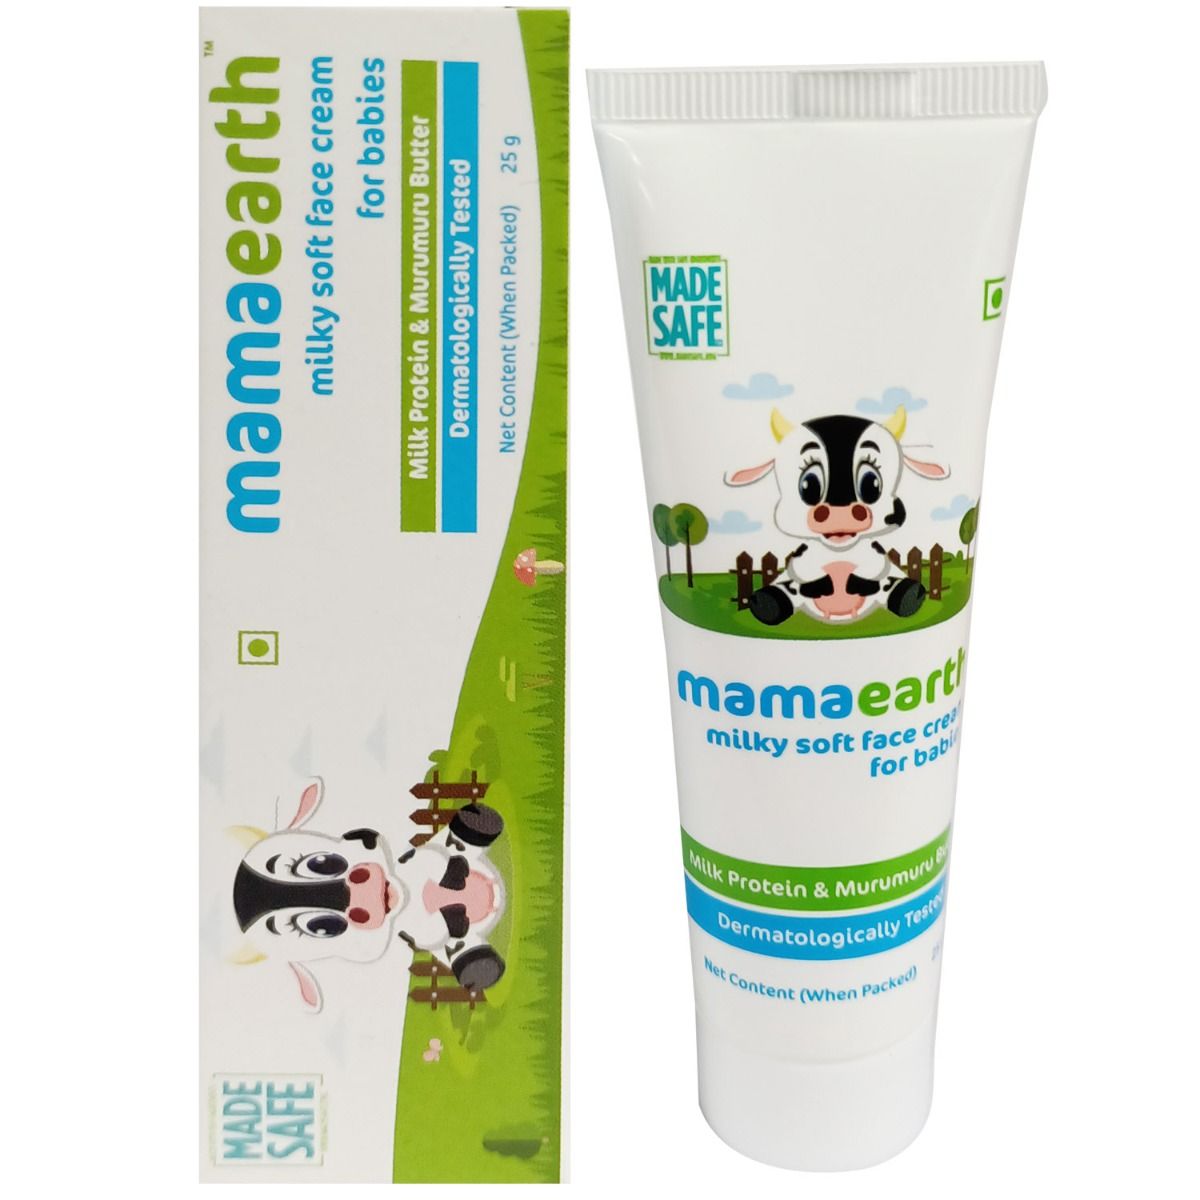 Mamaearth Milky Soft Face Cream Babies, 25 gm, Pack of 1 